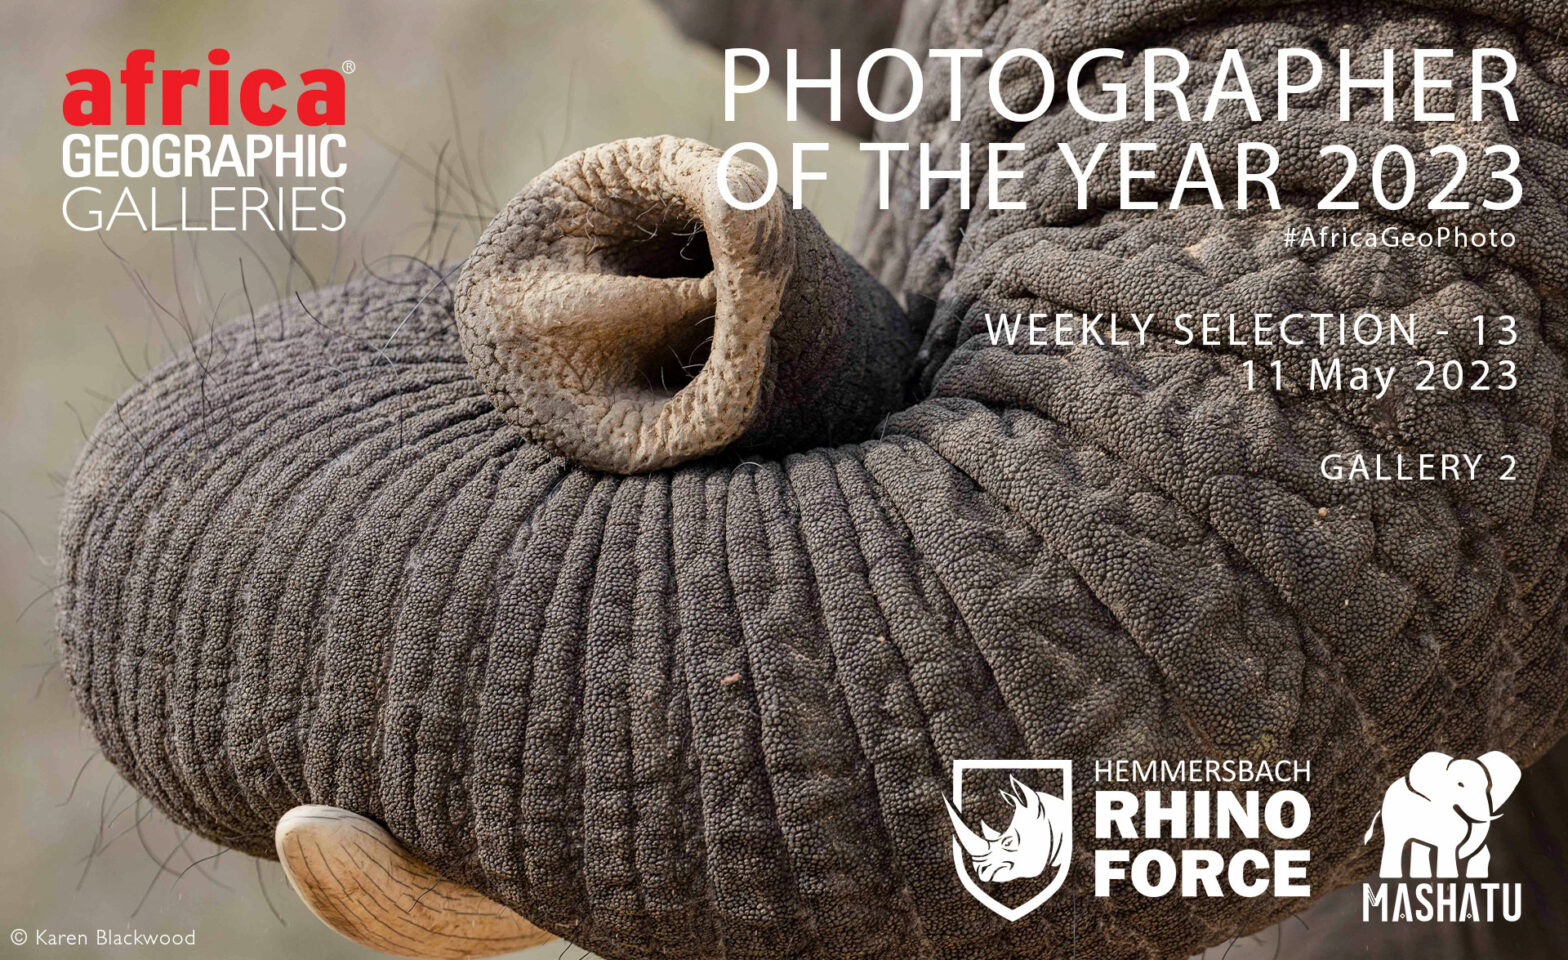 https://africageographic.com/wp-content/uploads/2023/05/cover-photographer-of-the-year-2023-week-13-2-1568x960.jpg